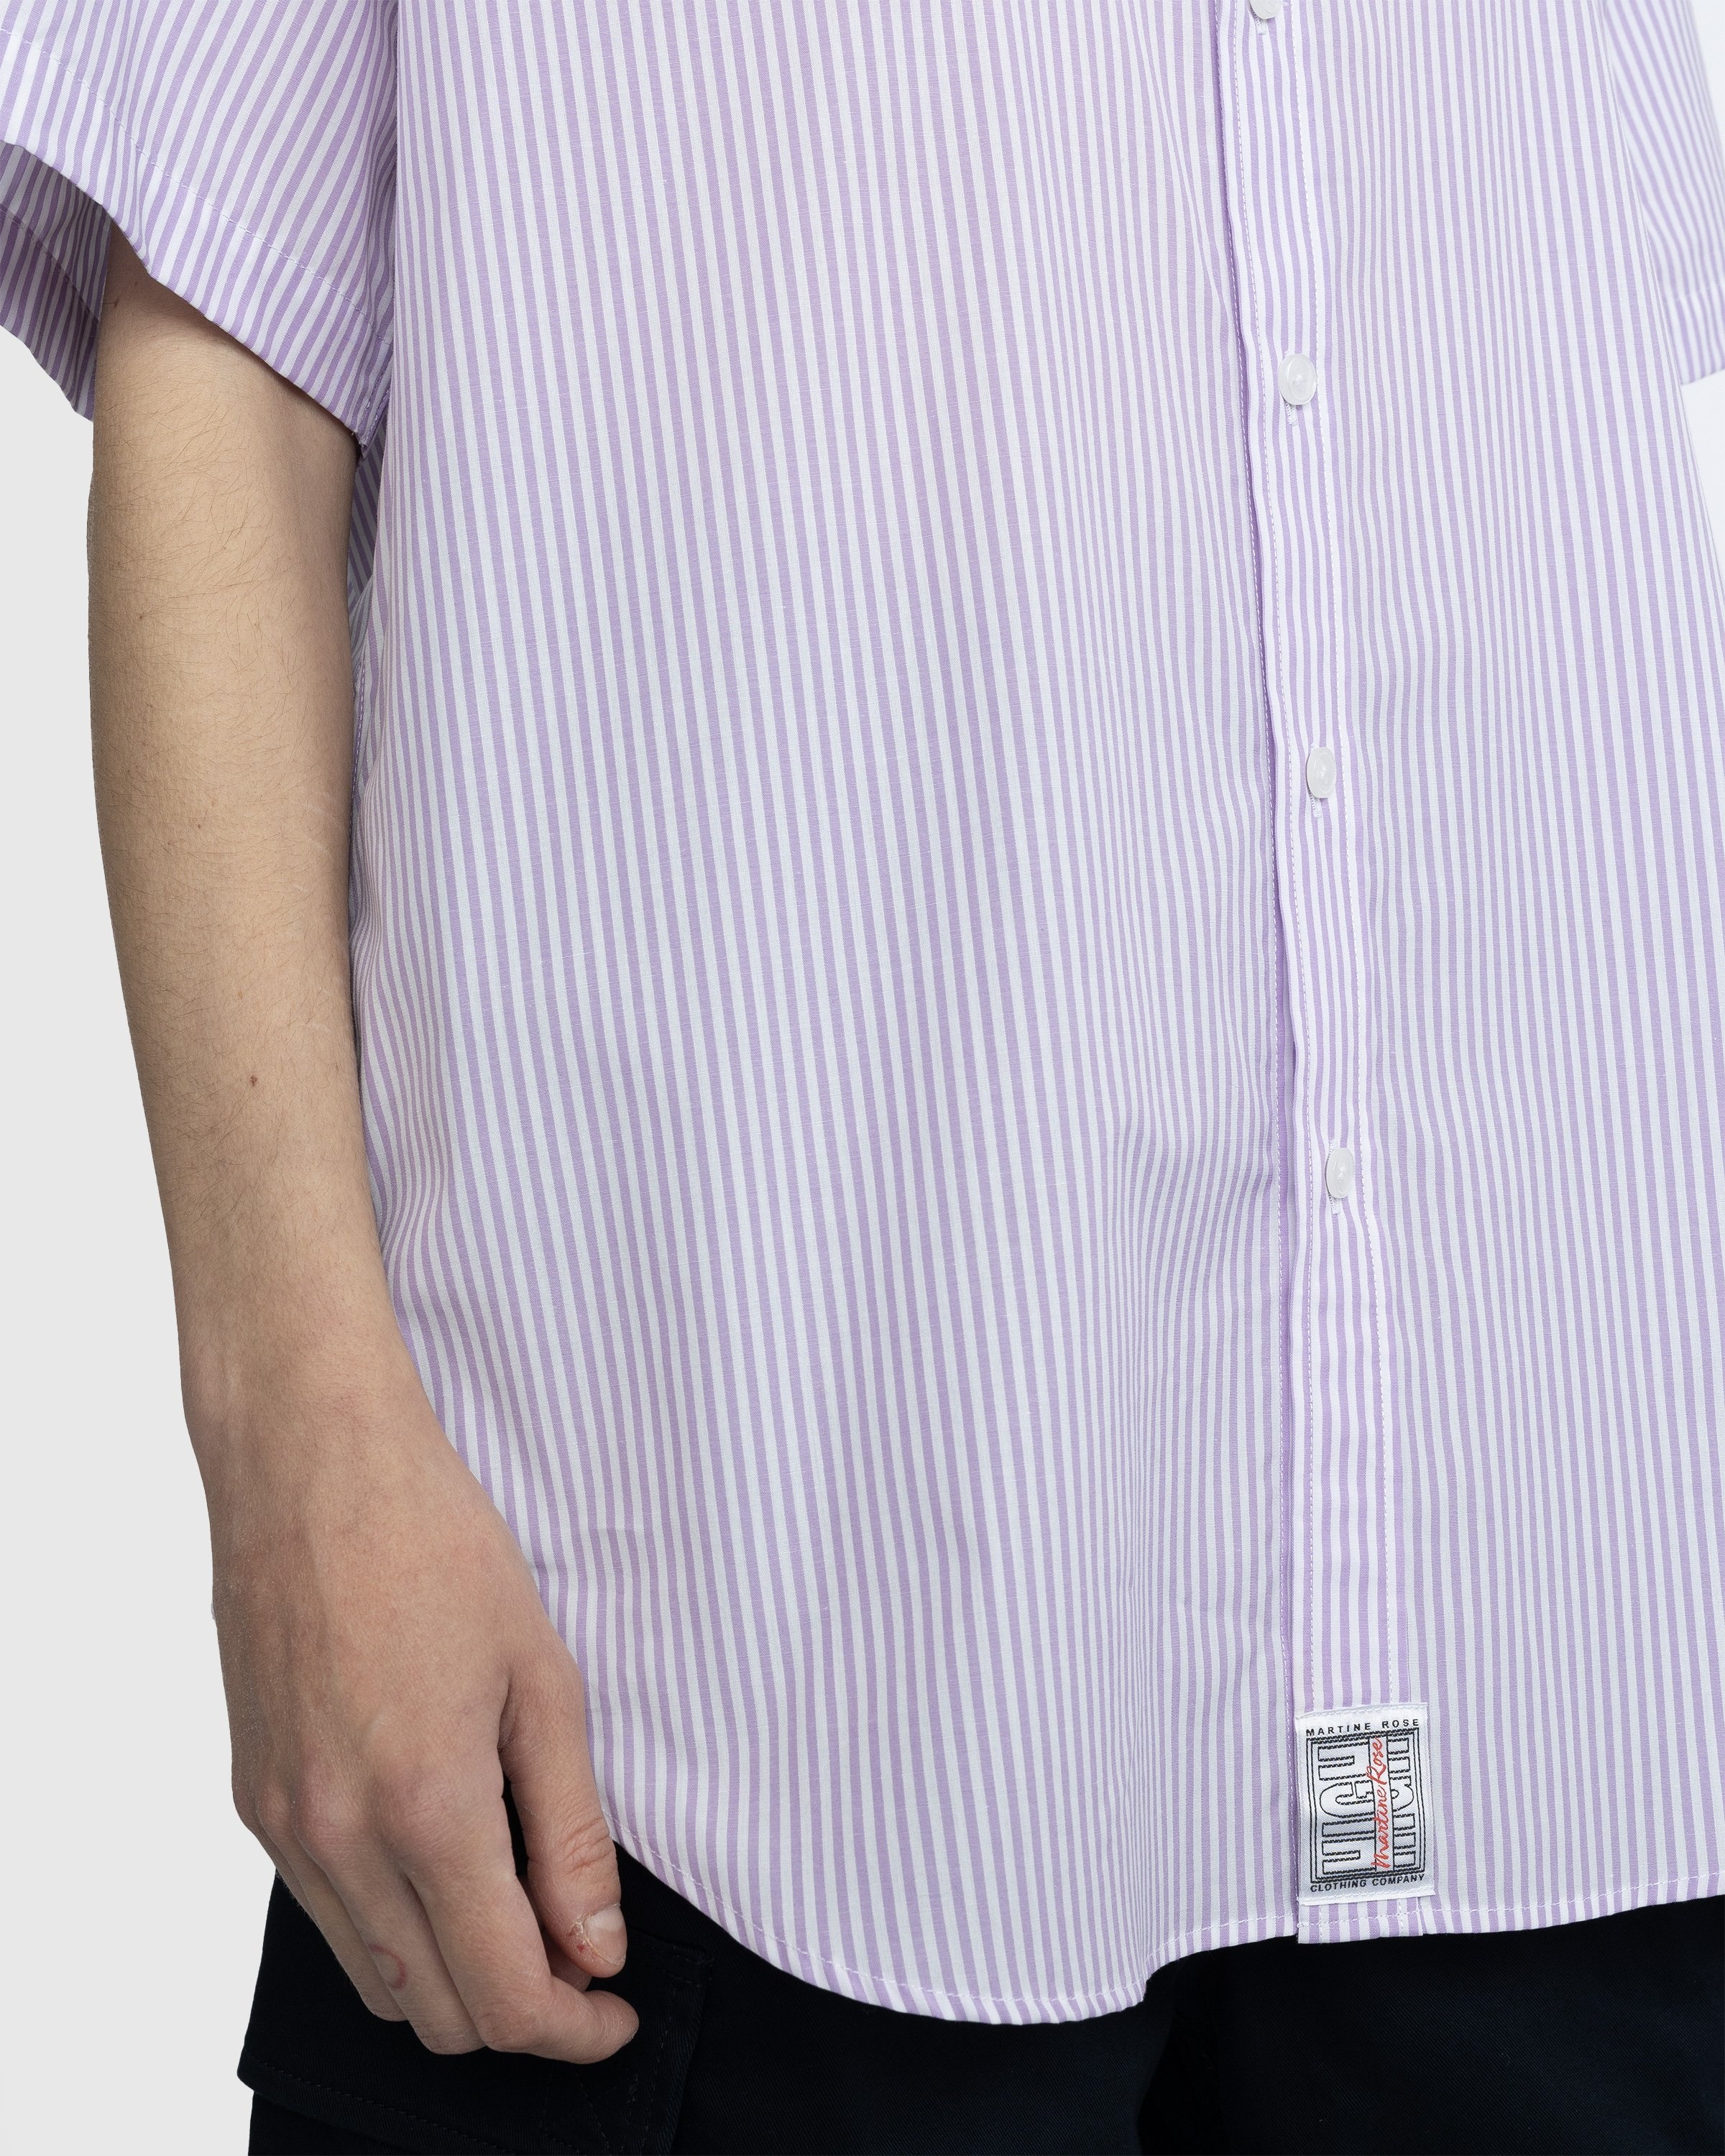 Martine Rose – Classic Short-Sleeve Button-Down Shirt Lilac and White Stripe - Shirts - Purple - Image 6